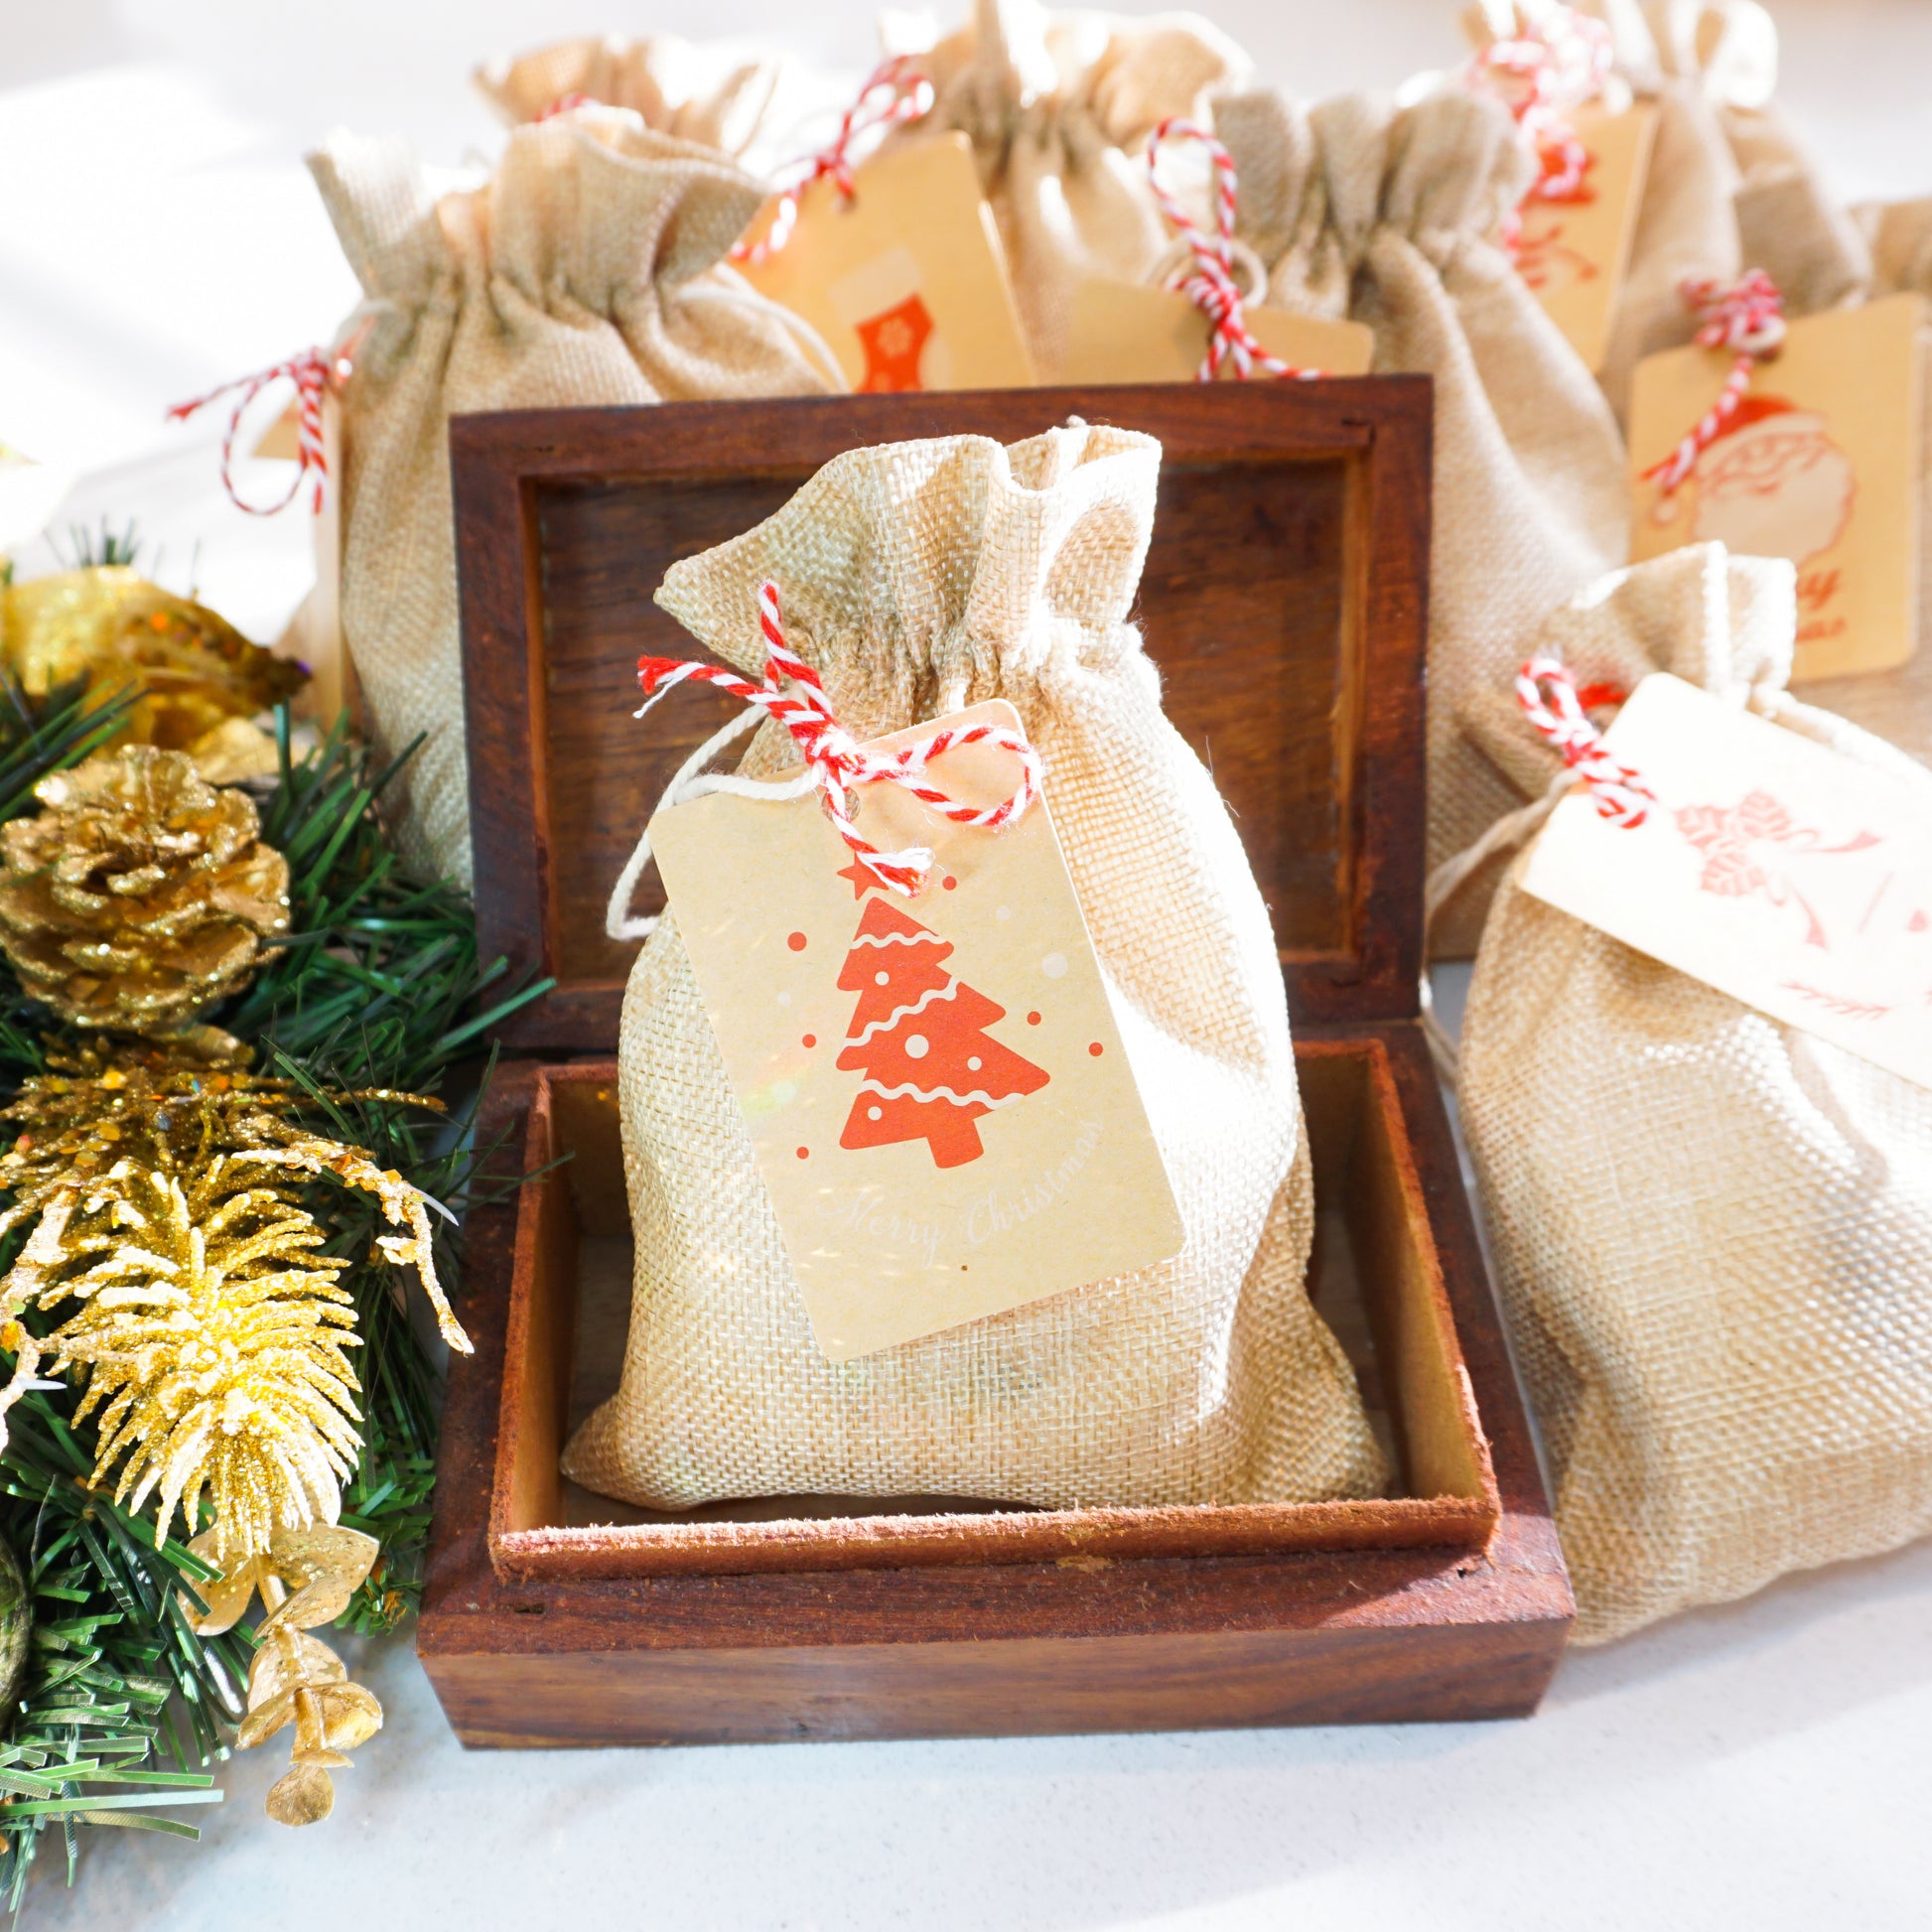 Gold organza bag containing Washla shampoo and conditioner set. Sits in a wooden box next to a wreath.